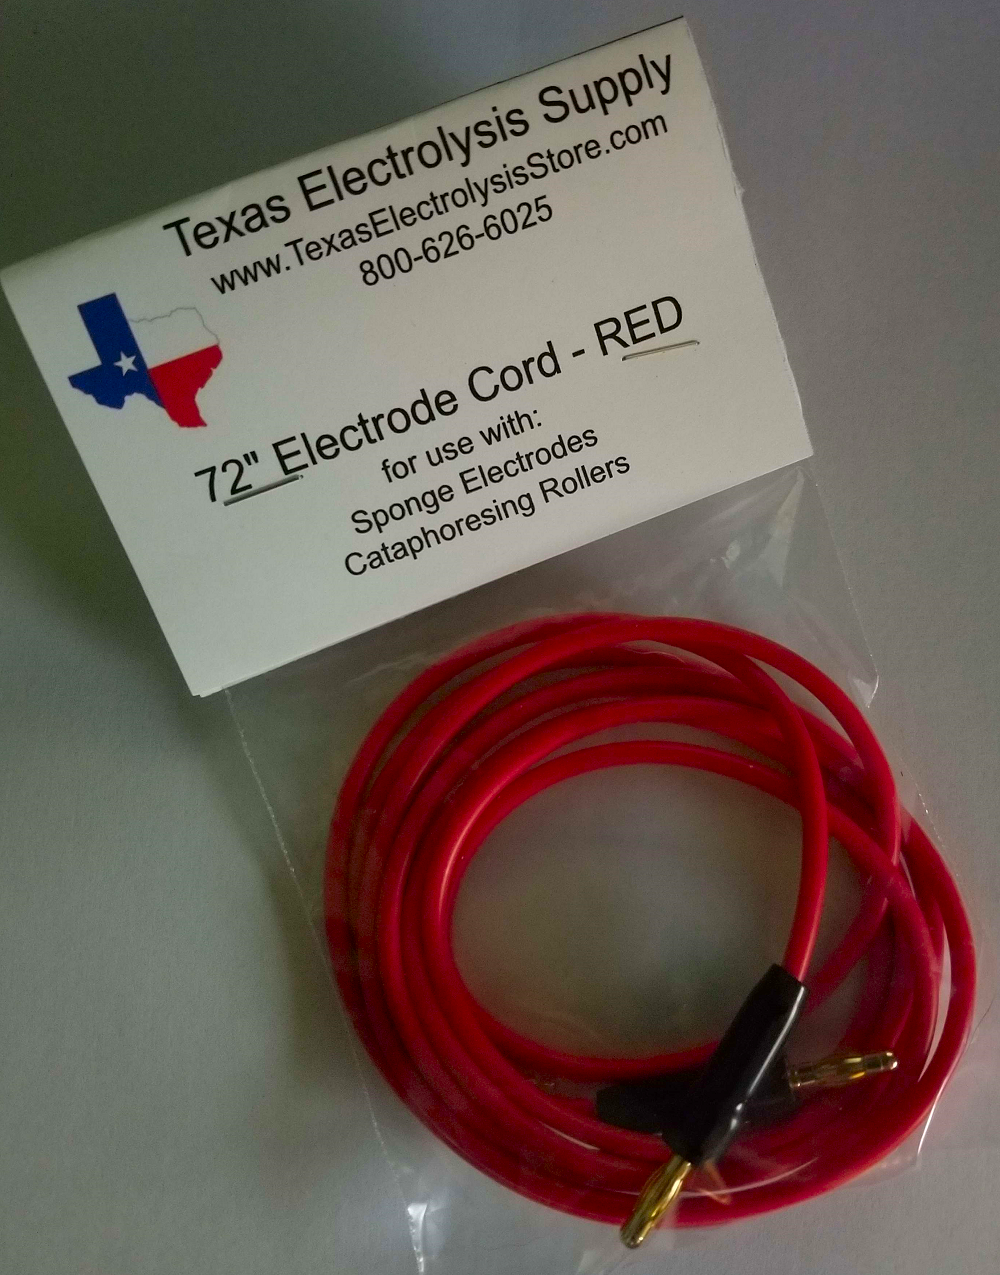 Electrode Cord - RED - Click Image to Close